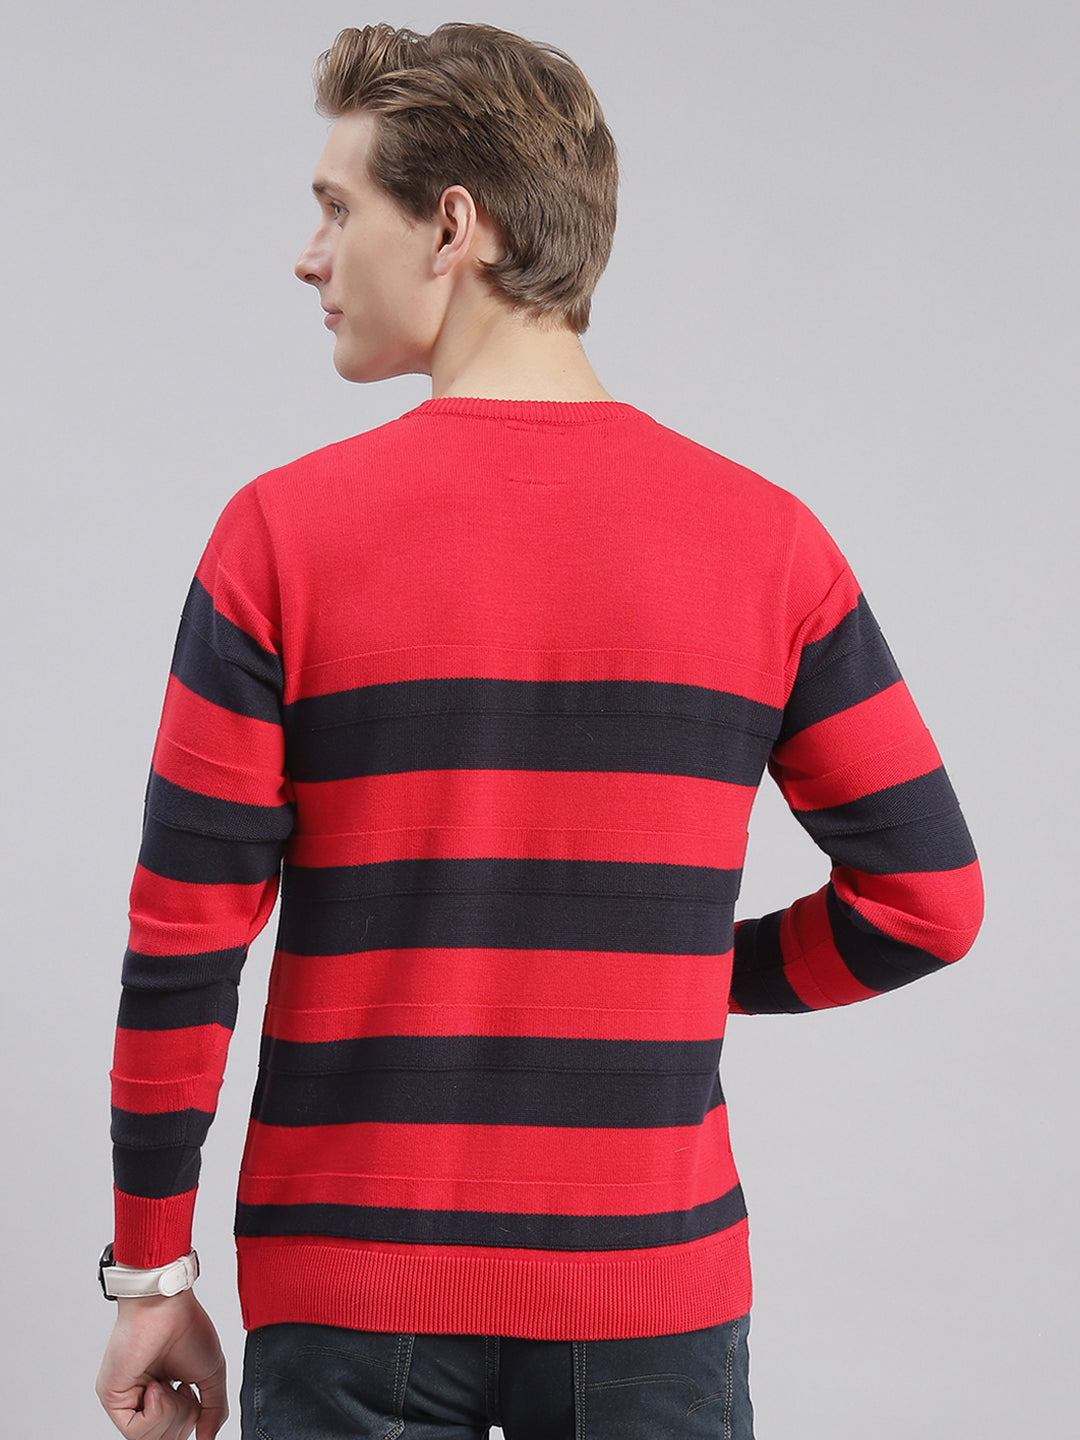 Men Red Stripe Round Neck Full Sleeve Sweaters/Pullovers